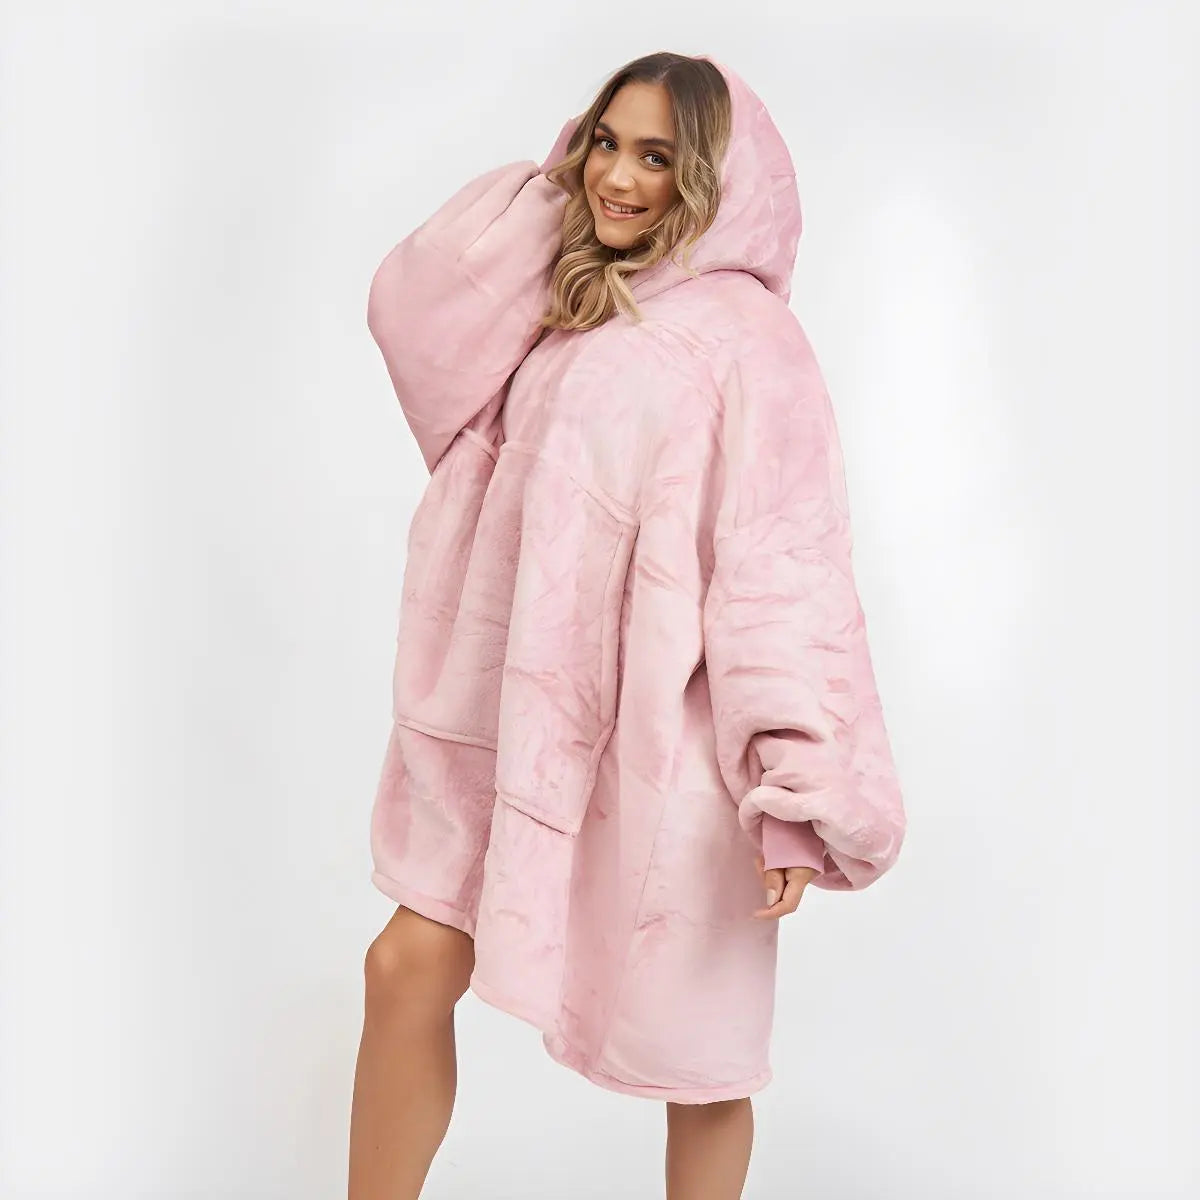 Getting Cozy in The Comfy Blanket Coat  Comfy blankets, Blanket coat,  Getting cozy